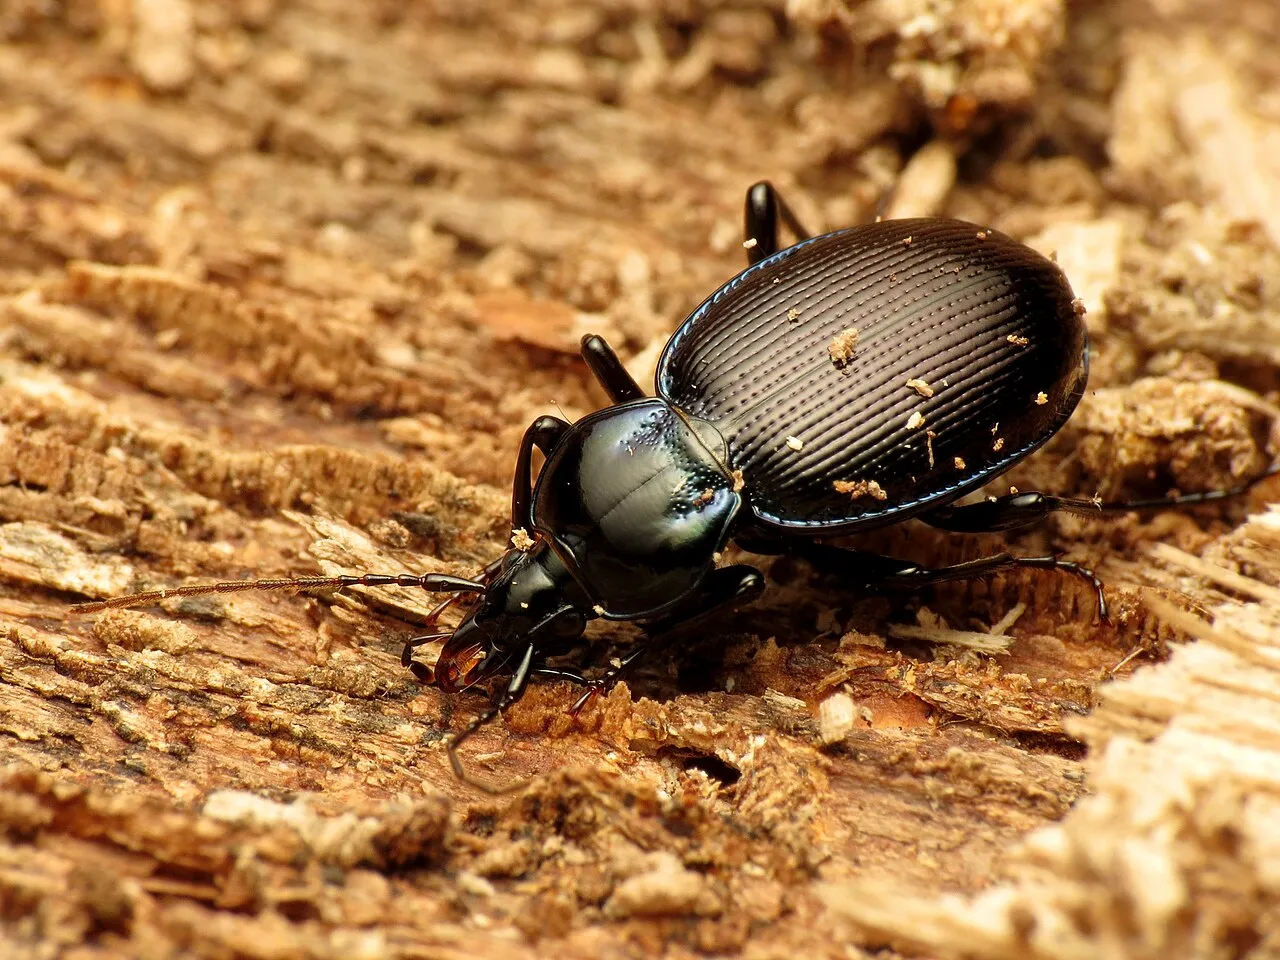 Are Beetles Consumers? Beetle Food Chain Position and Role